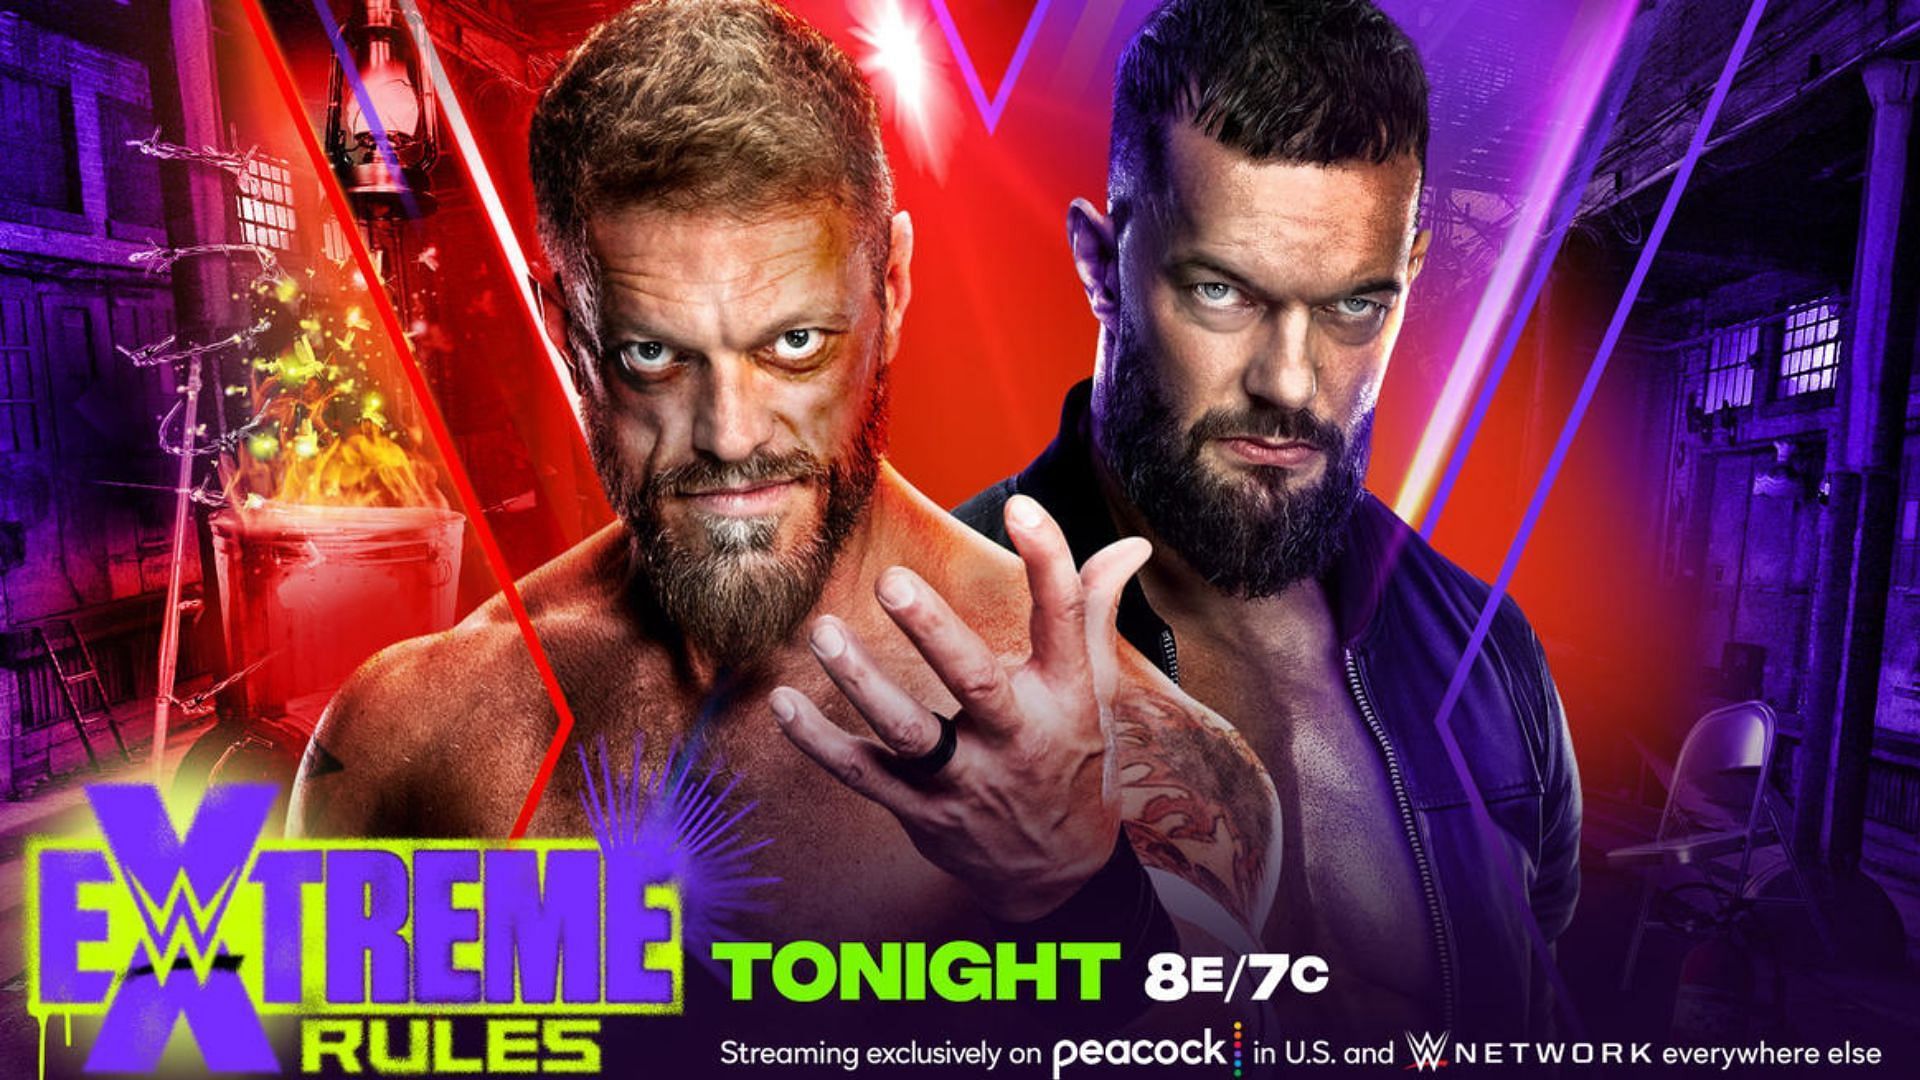 Finn Balor will battle Edge in an I Quit match tonight at WWE Extreme Rules